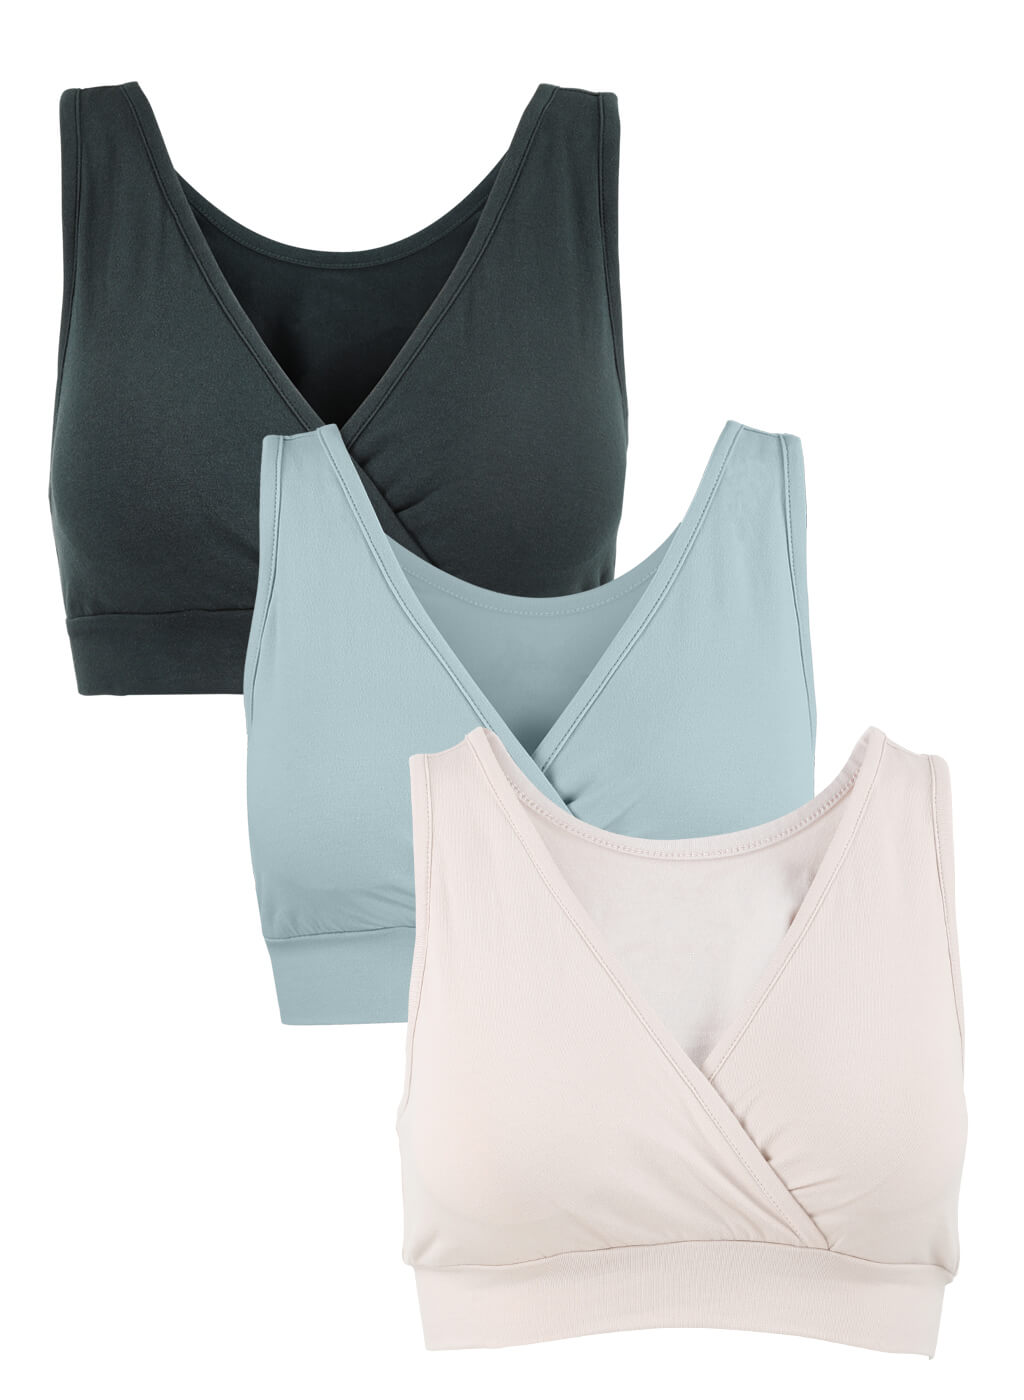 Benefits of Wearing a Good Quality Nursing Bra During Pregnancy - Lovemere  - Best Online Maternity Clothing Store - Medium